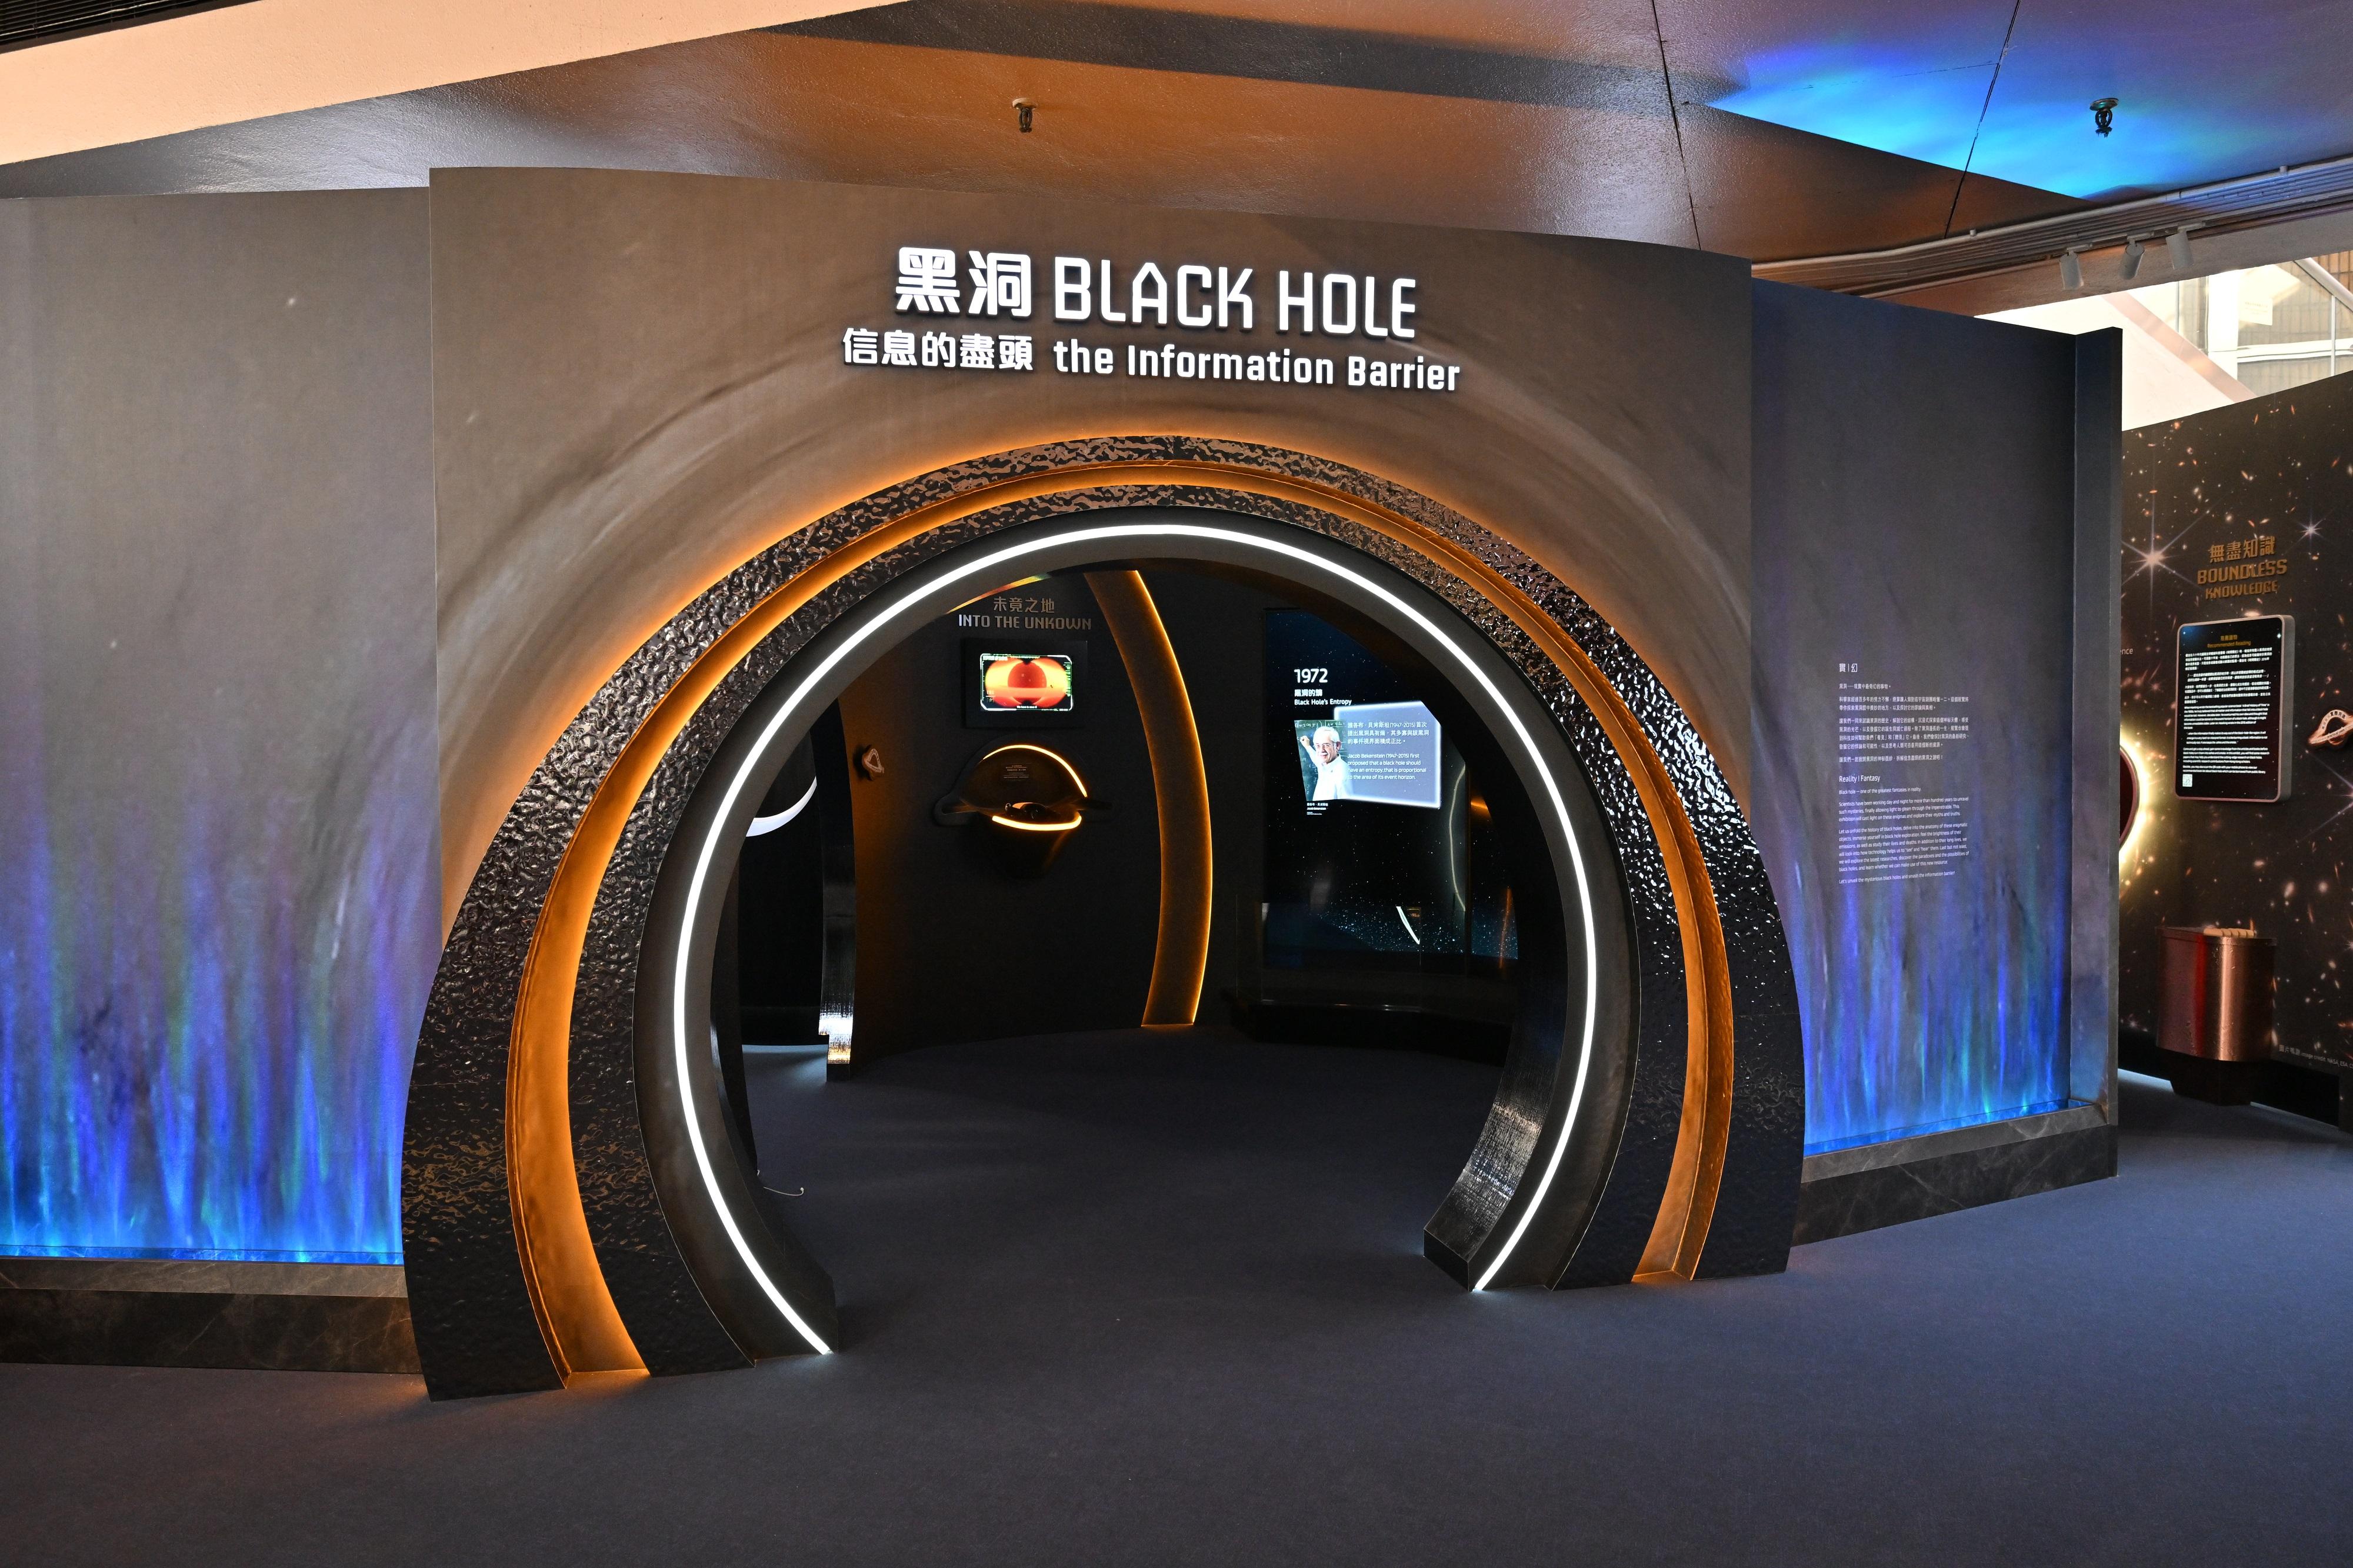 The Hong Kong Space Museum will launch a new free special exhibition, "Black Hole: The Information Barrier", starting tomorrow (October 25).